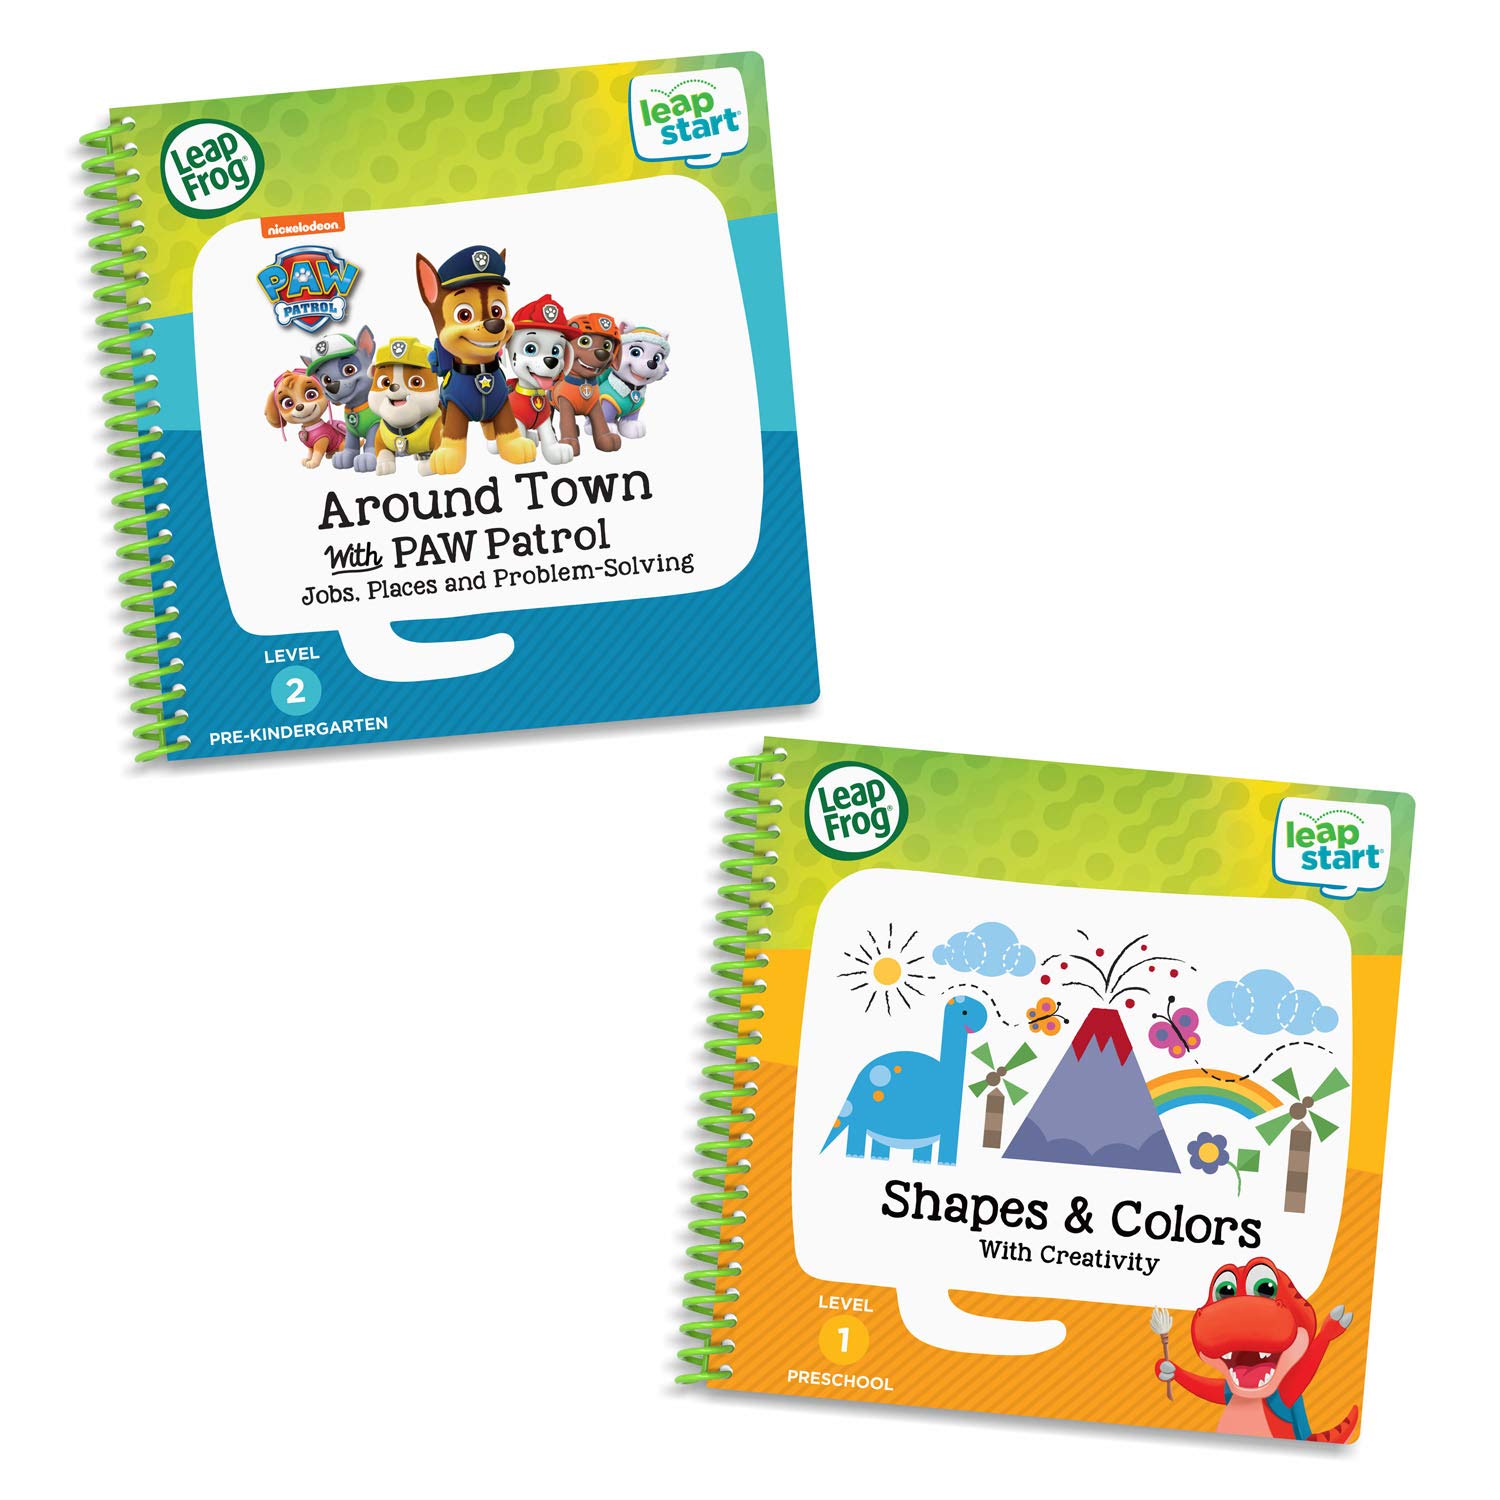 LeapFrog LeapStart 2 Book Combo Pack: Shapes & Colors & Around Town with PAW Patrol,Multicolor